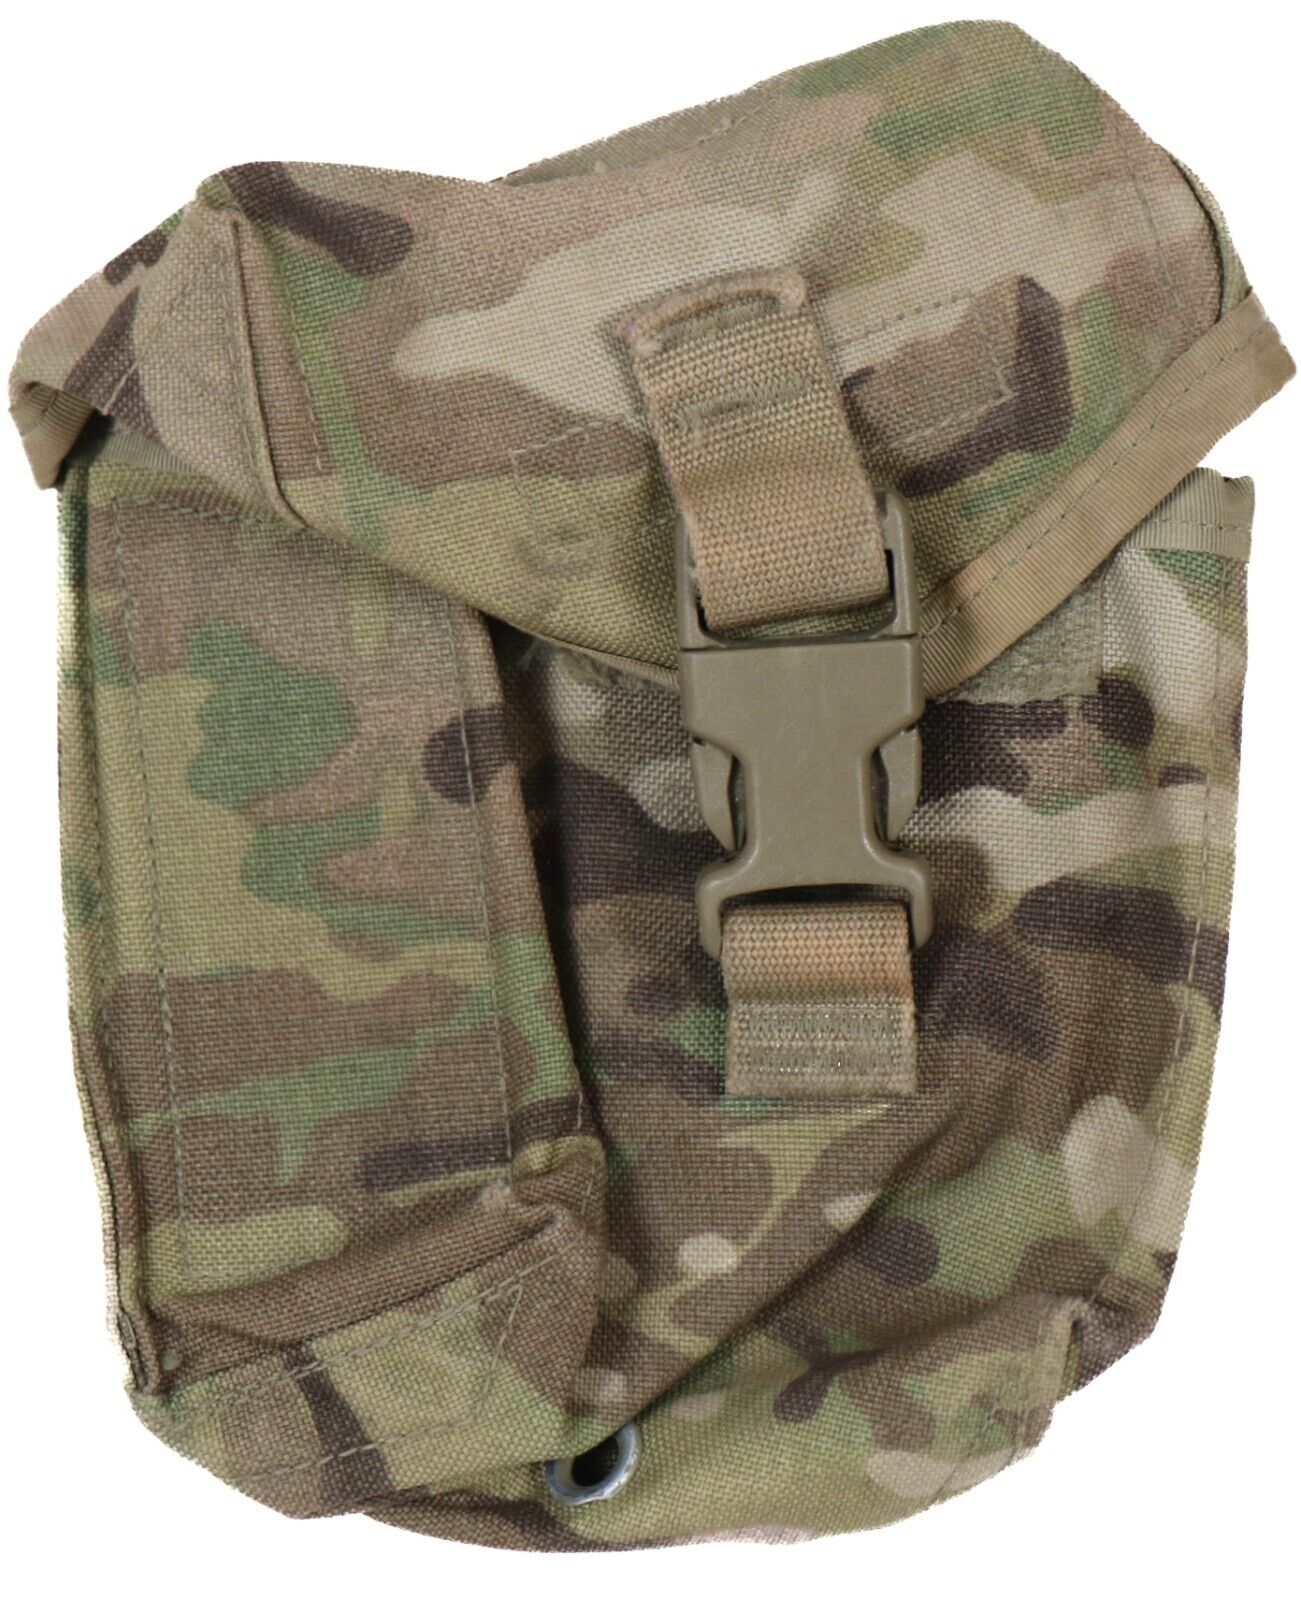 NEW US Molle II IFAK Individual First Aid Kit Pouch OCP Multicam Military